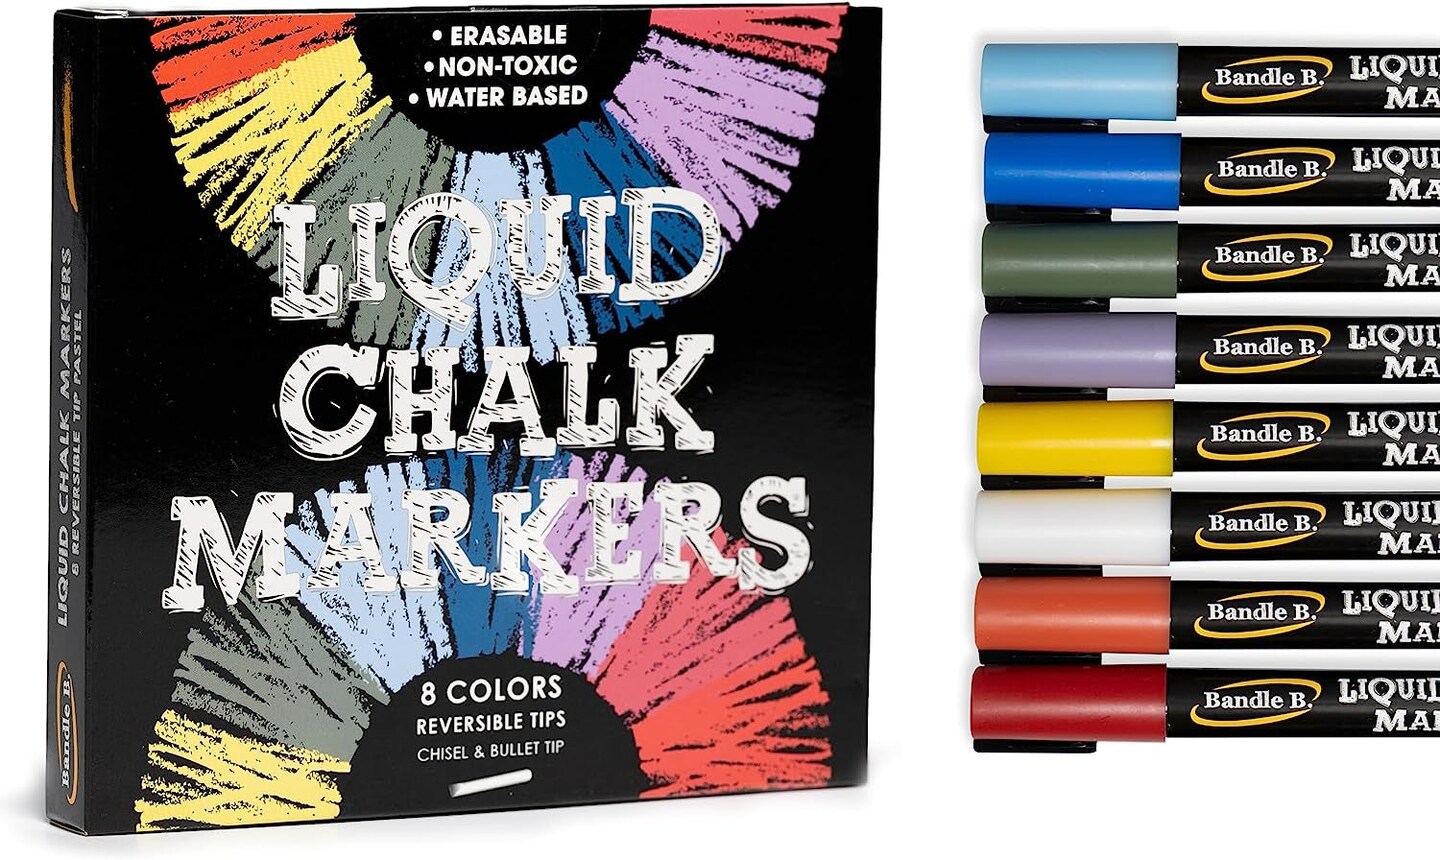 Bandle B. Chalk Markers - 8 Vibrant Fine Tip, Erasable, Non-Toxic, Water-Based, for Kids & Adults for Glass or Chalkboard Markers for B